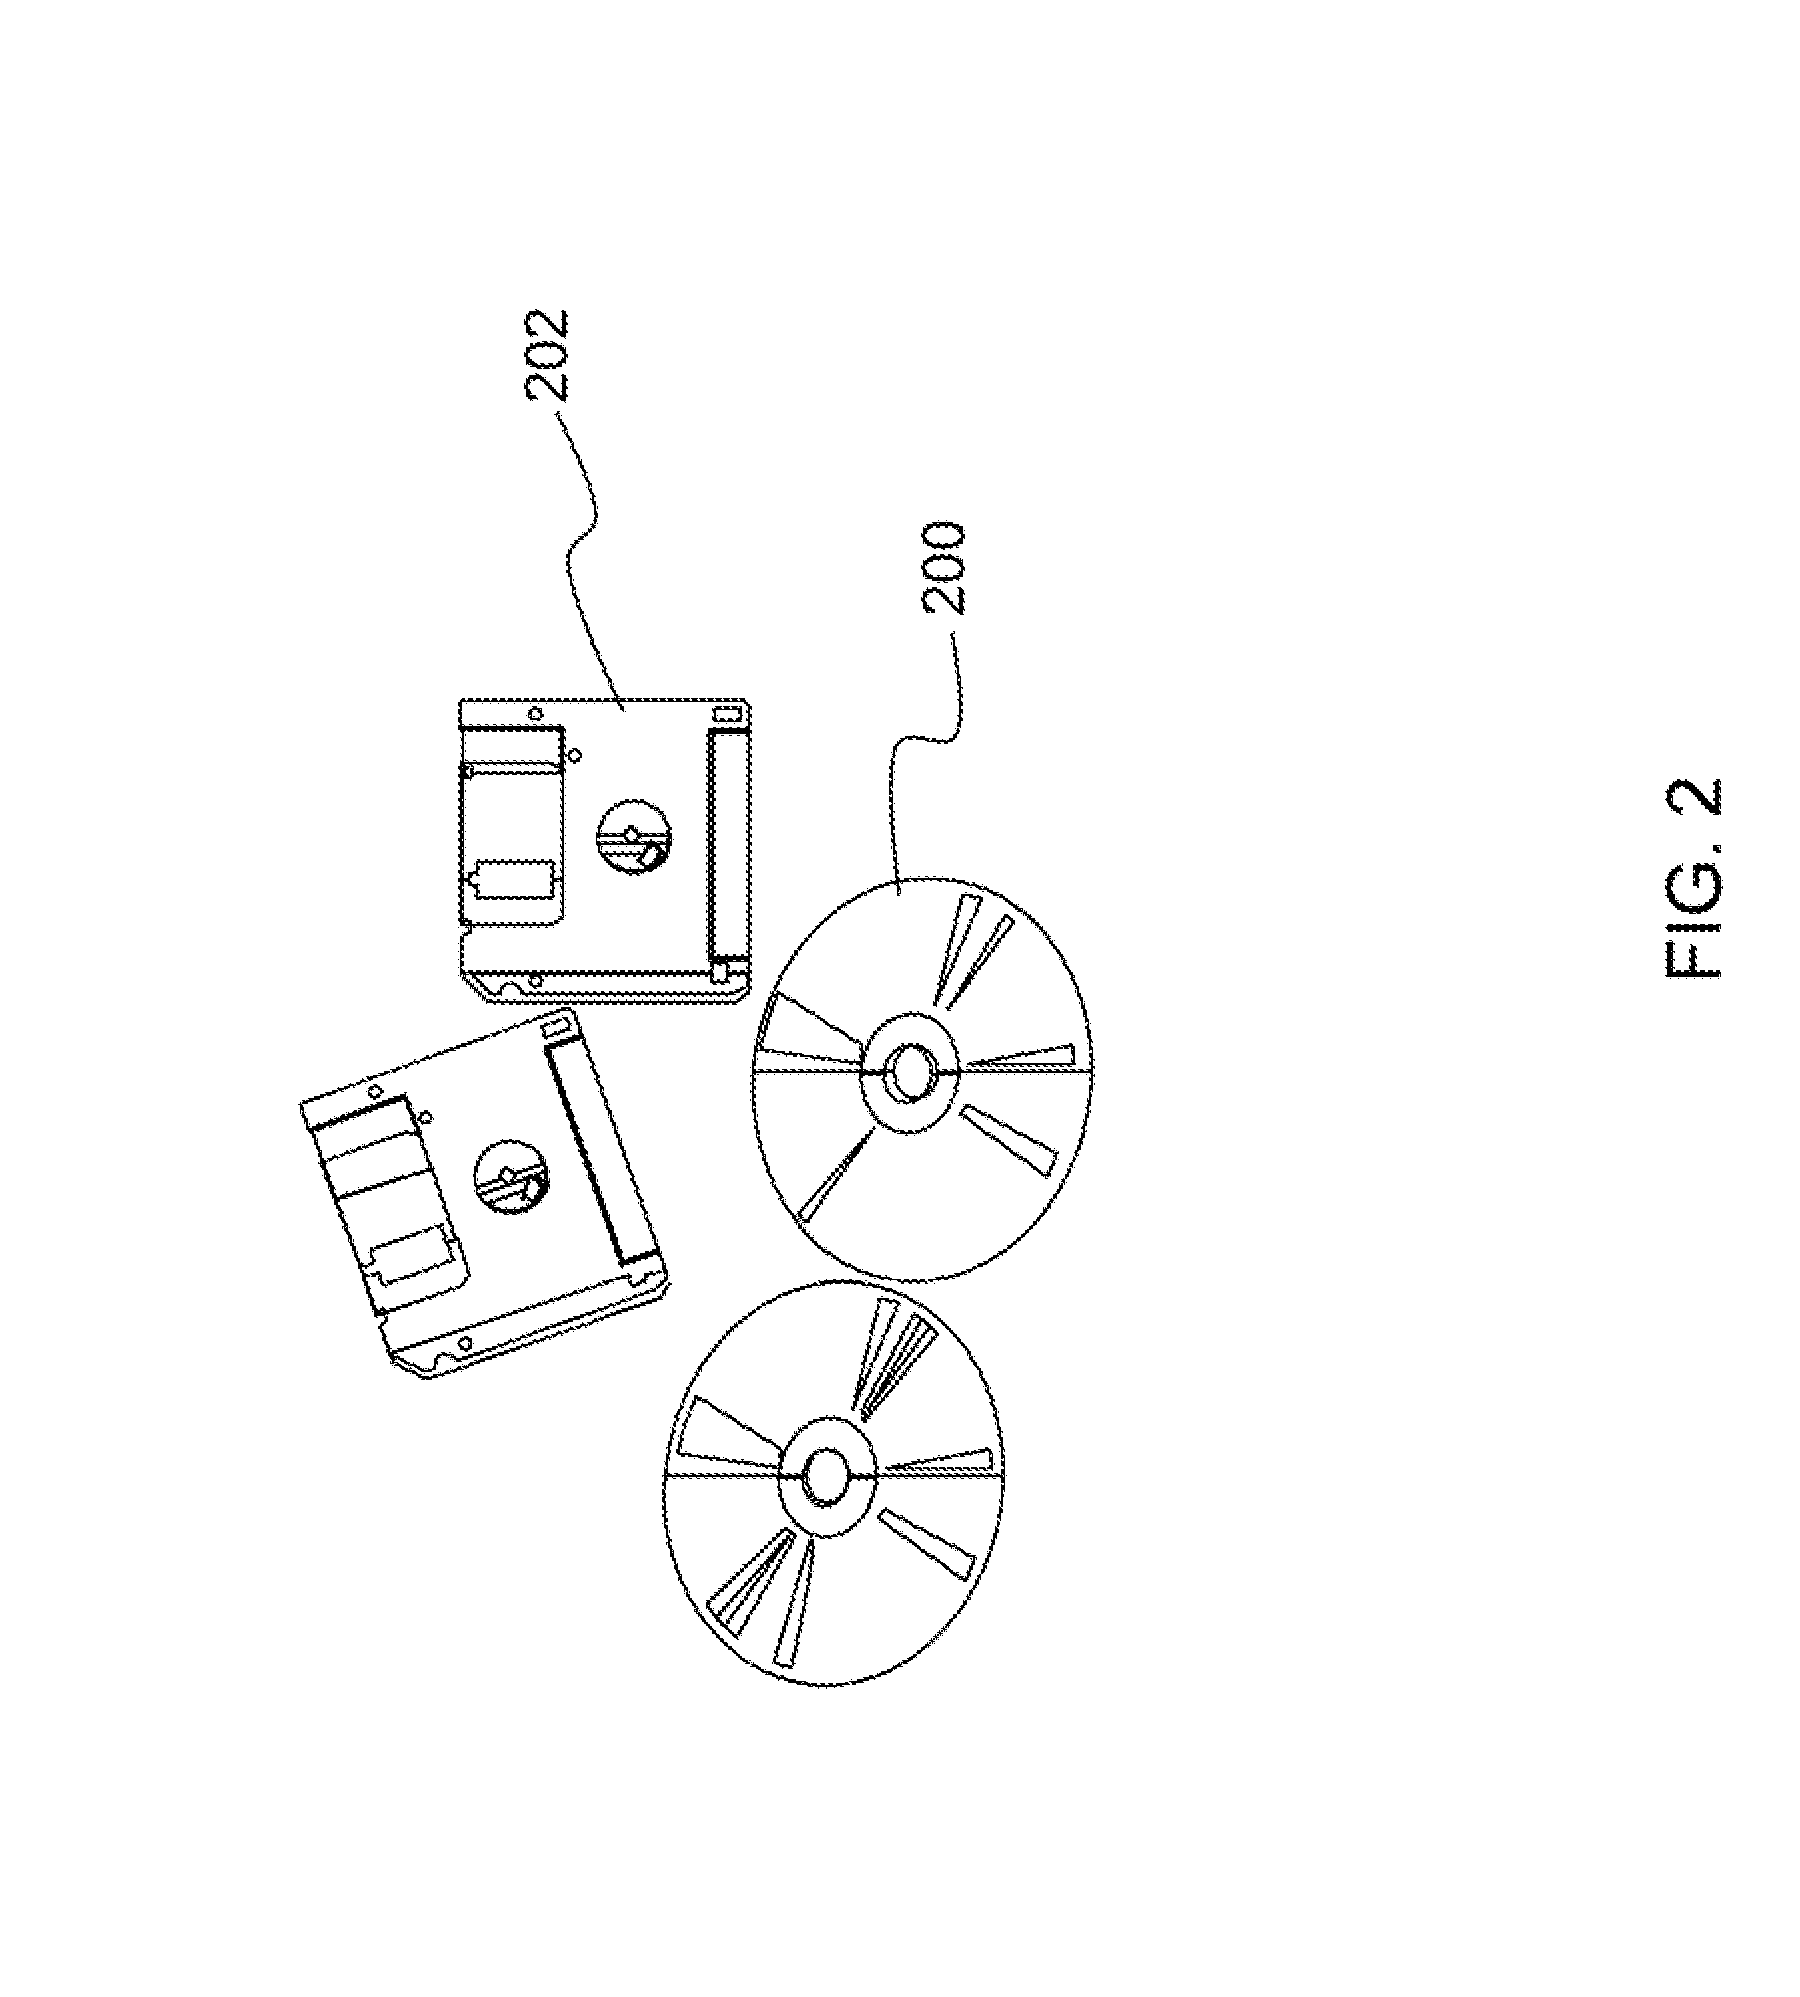 System for representing, storing, and reconstructing an input signal